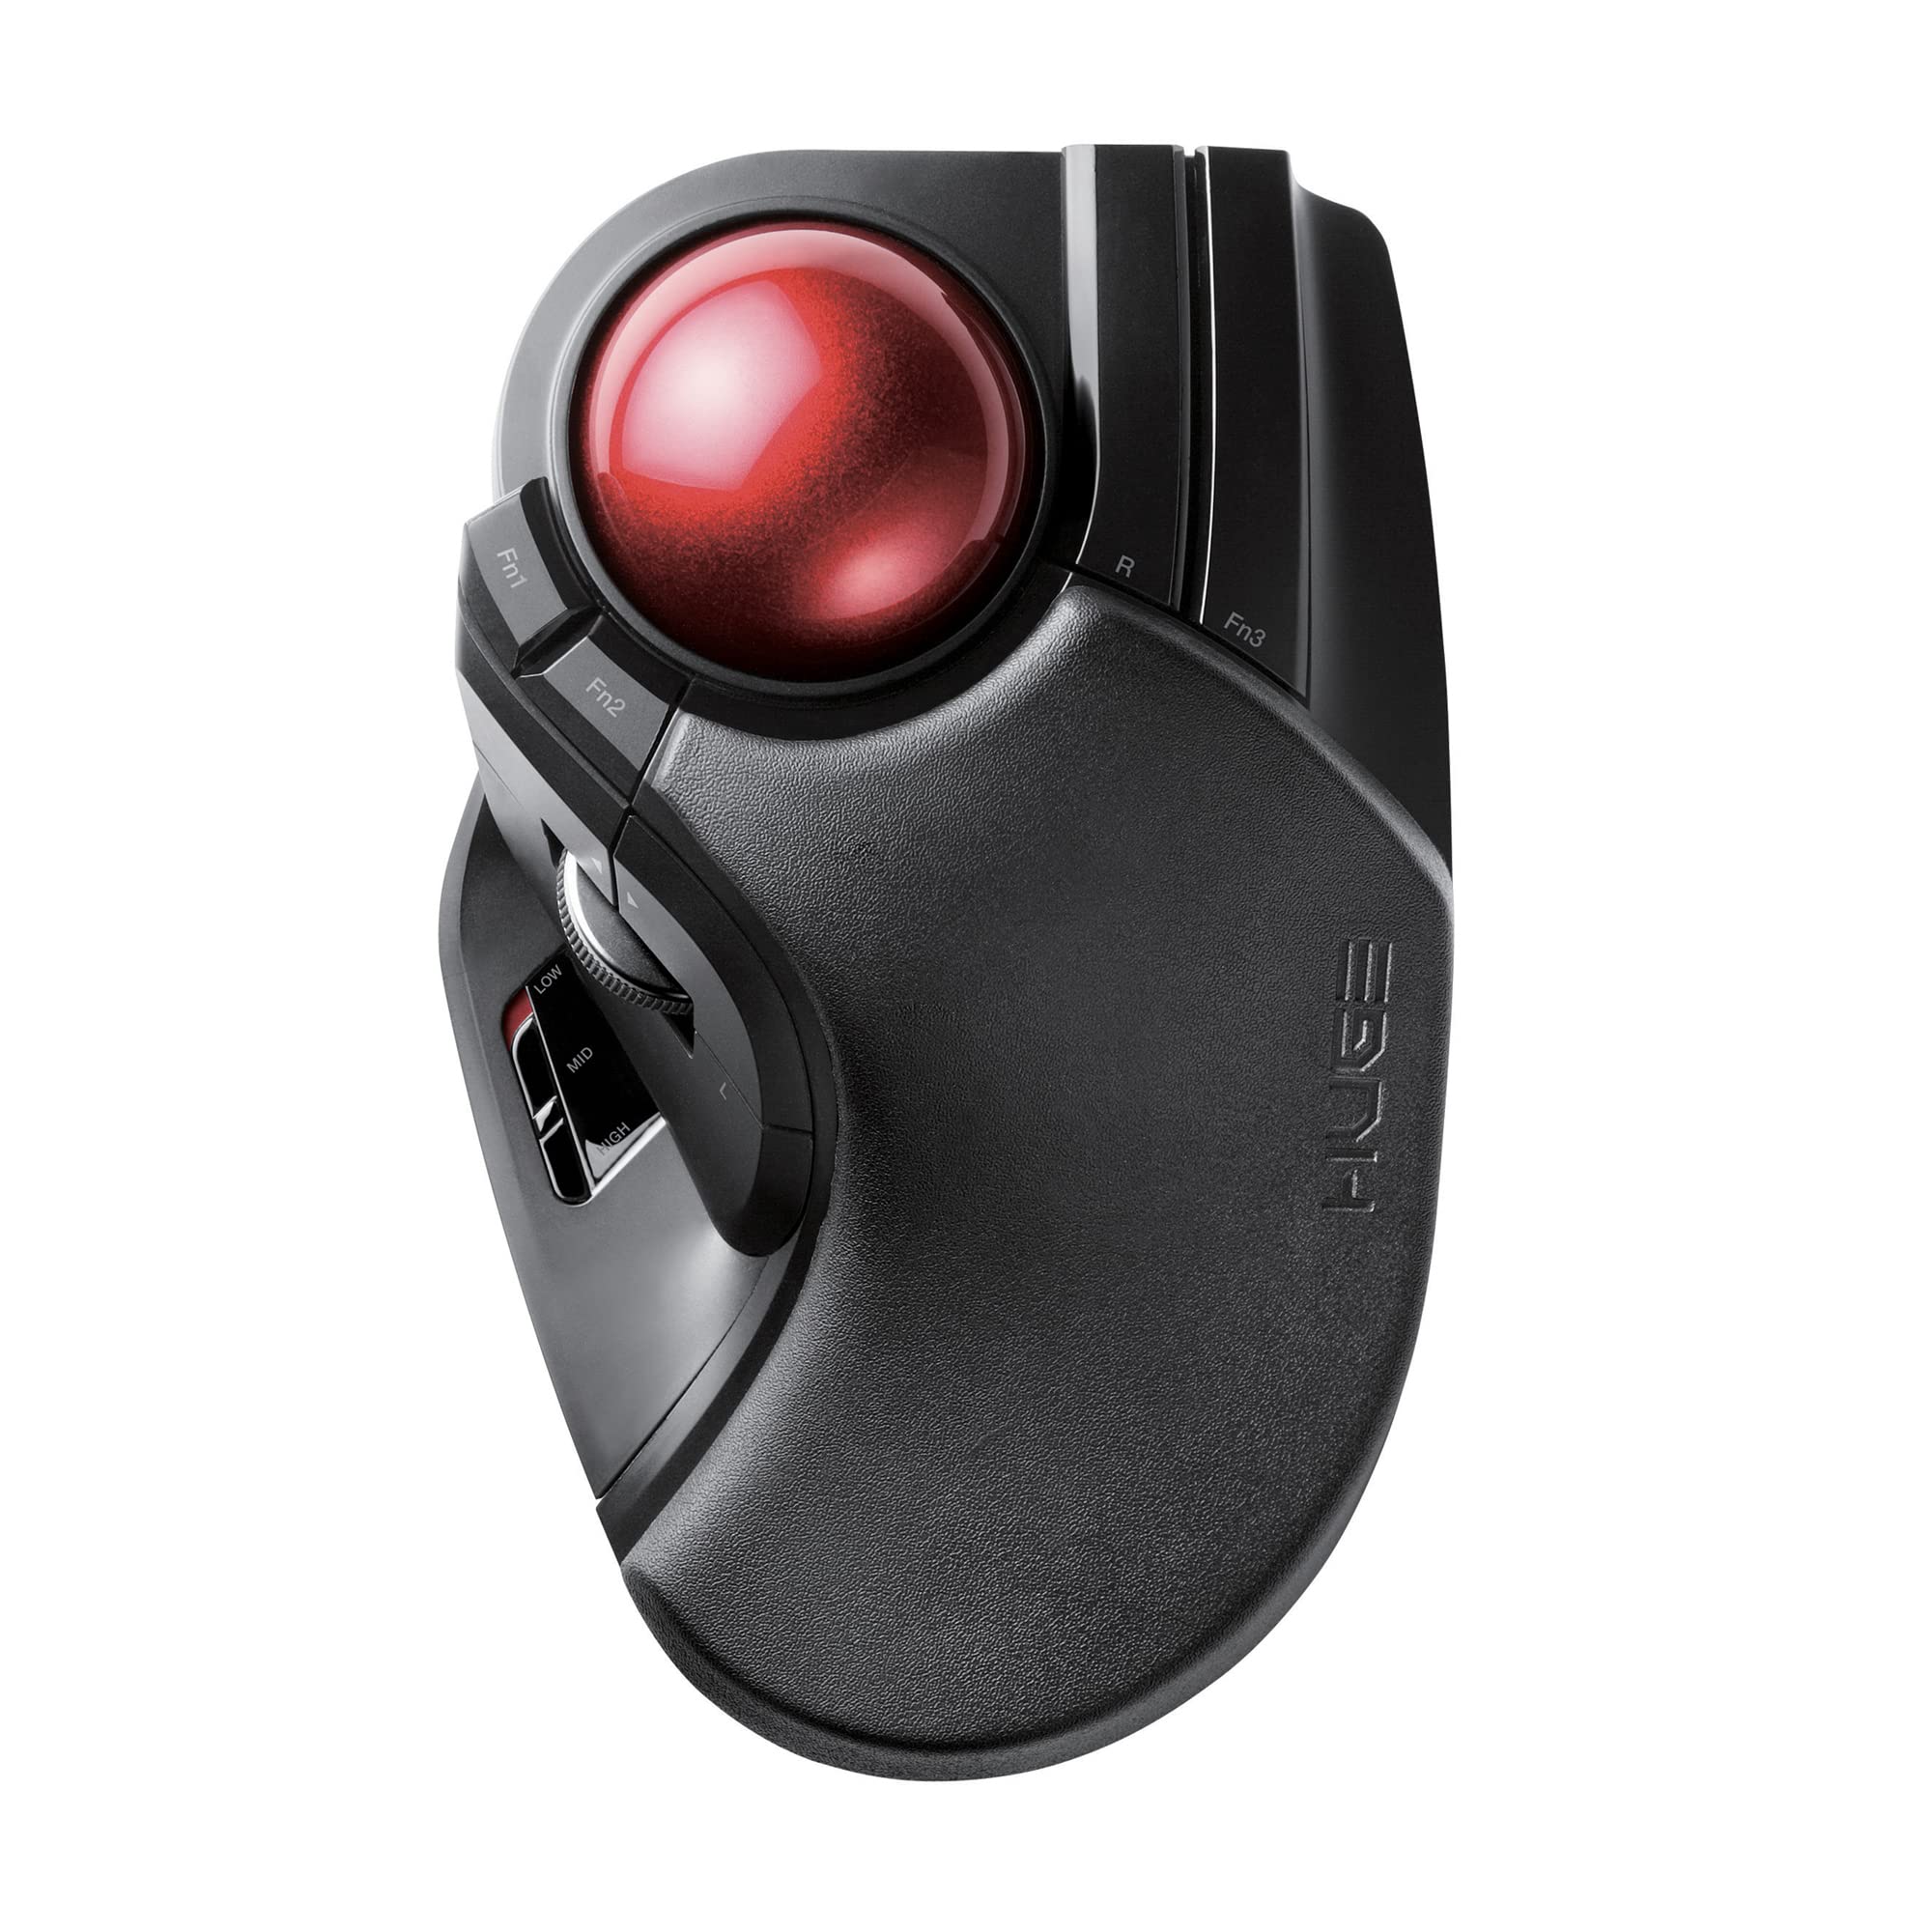 ELECOM HUGE Trackball Mouse, 2.4GHz Wireless, Finger Control, 8-Button Function, Precision Optical Gaming Sensor, Palm Rest Attached, Smooth Red Ball, Windows11, macOS (M-HT1DRBK)